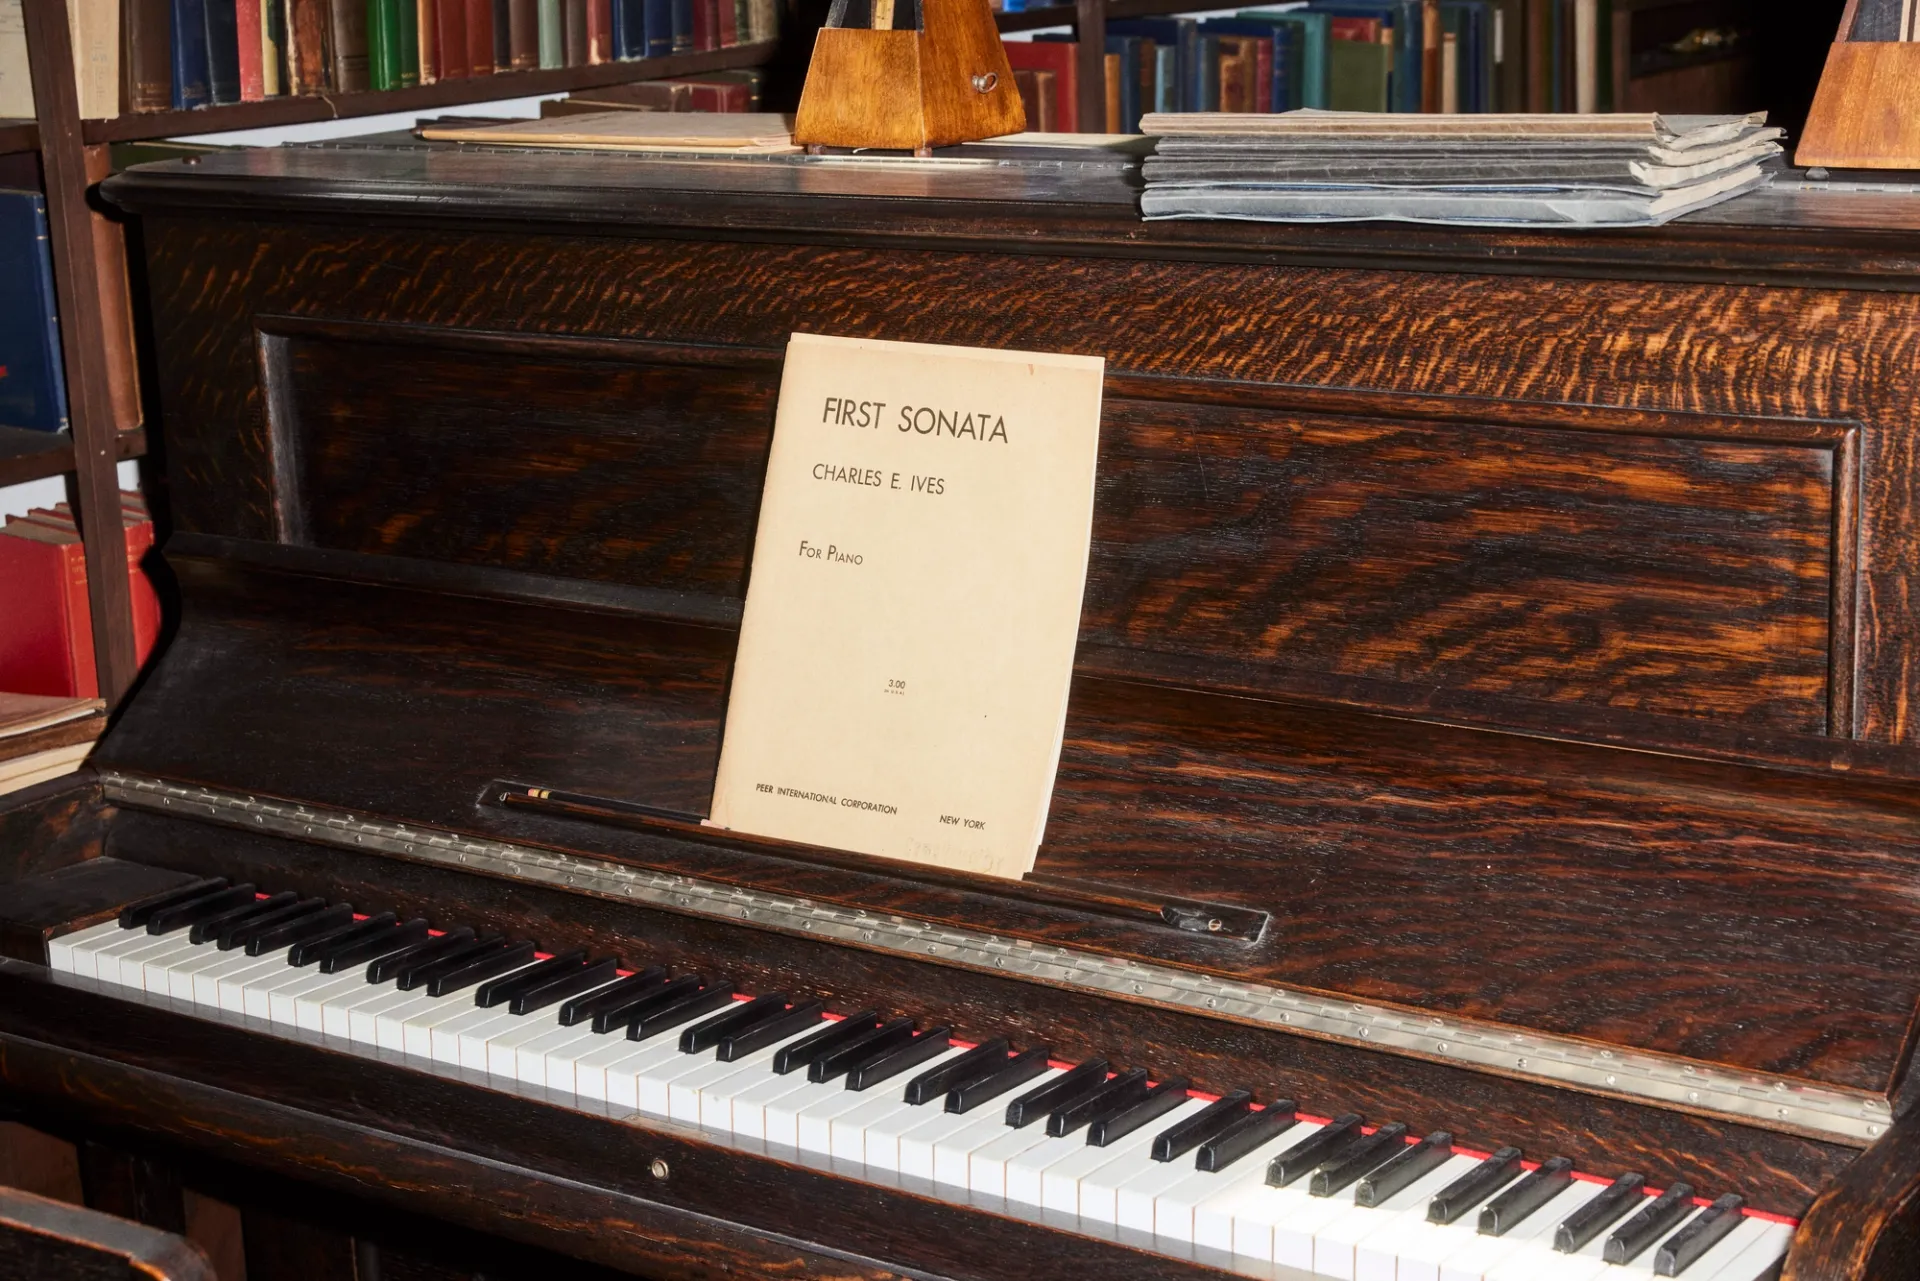 A dark wooden upright piano with a piece of sheet music on it attributed to Charles Ives.